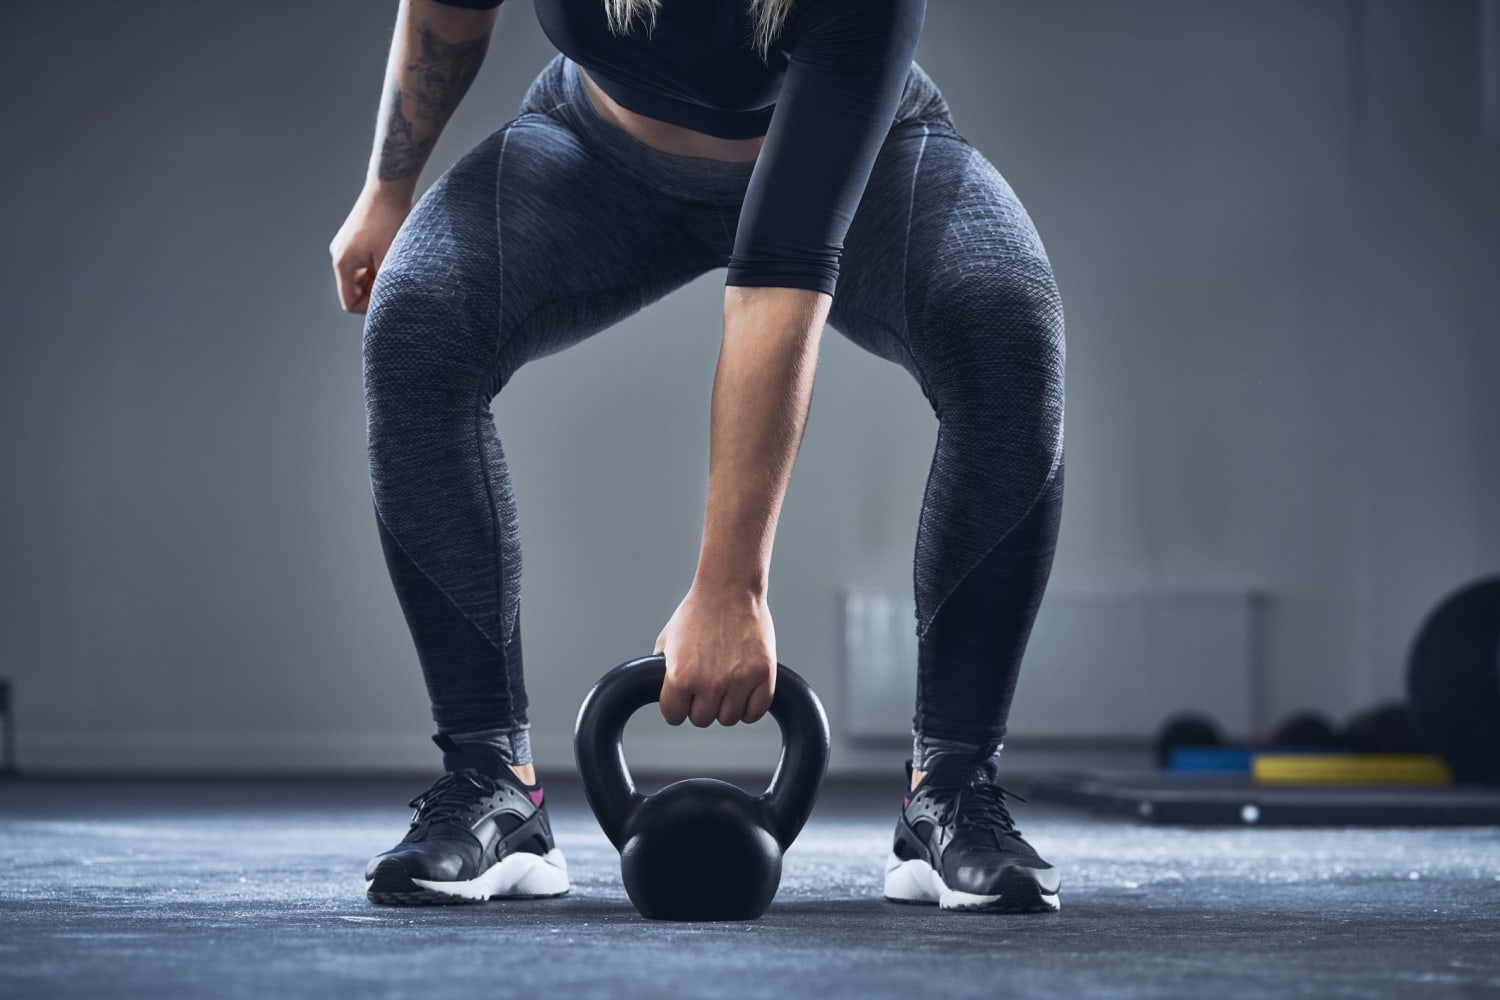 Who Invented the Kettlebell?